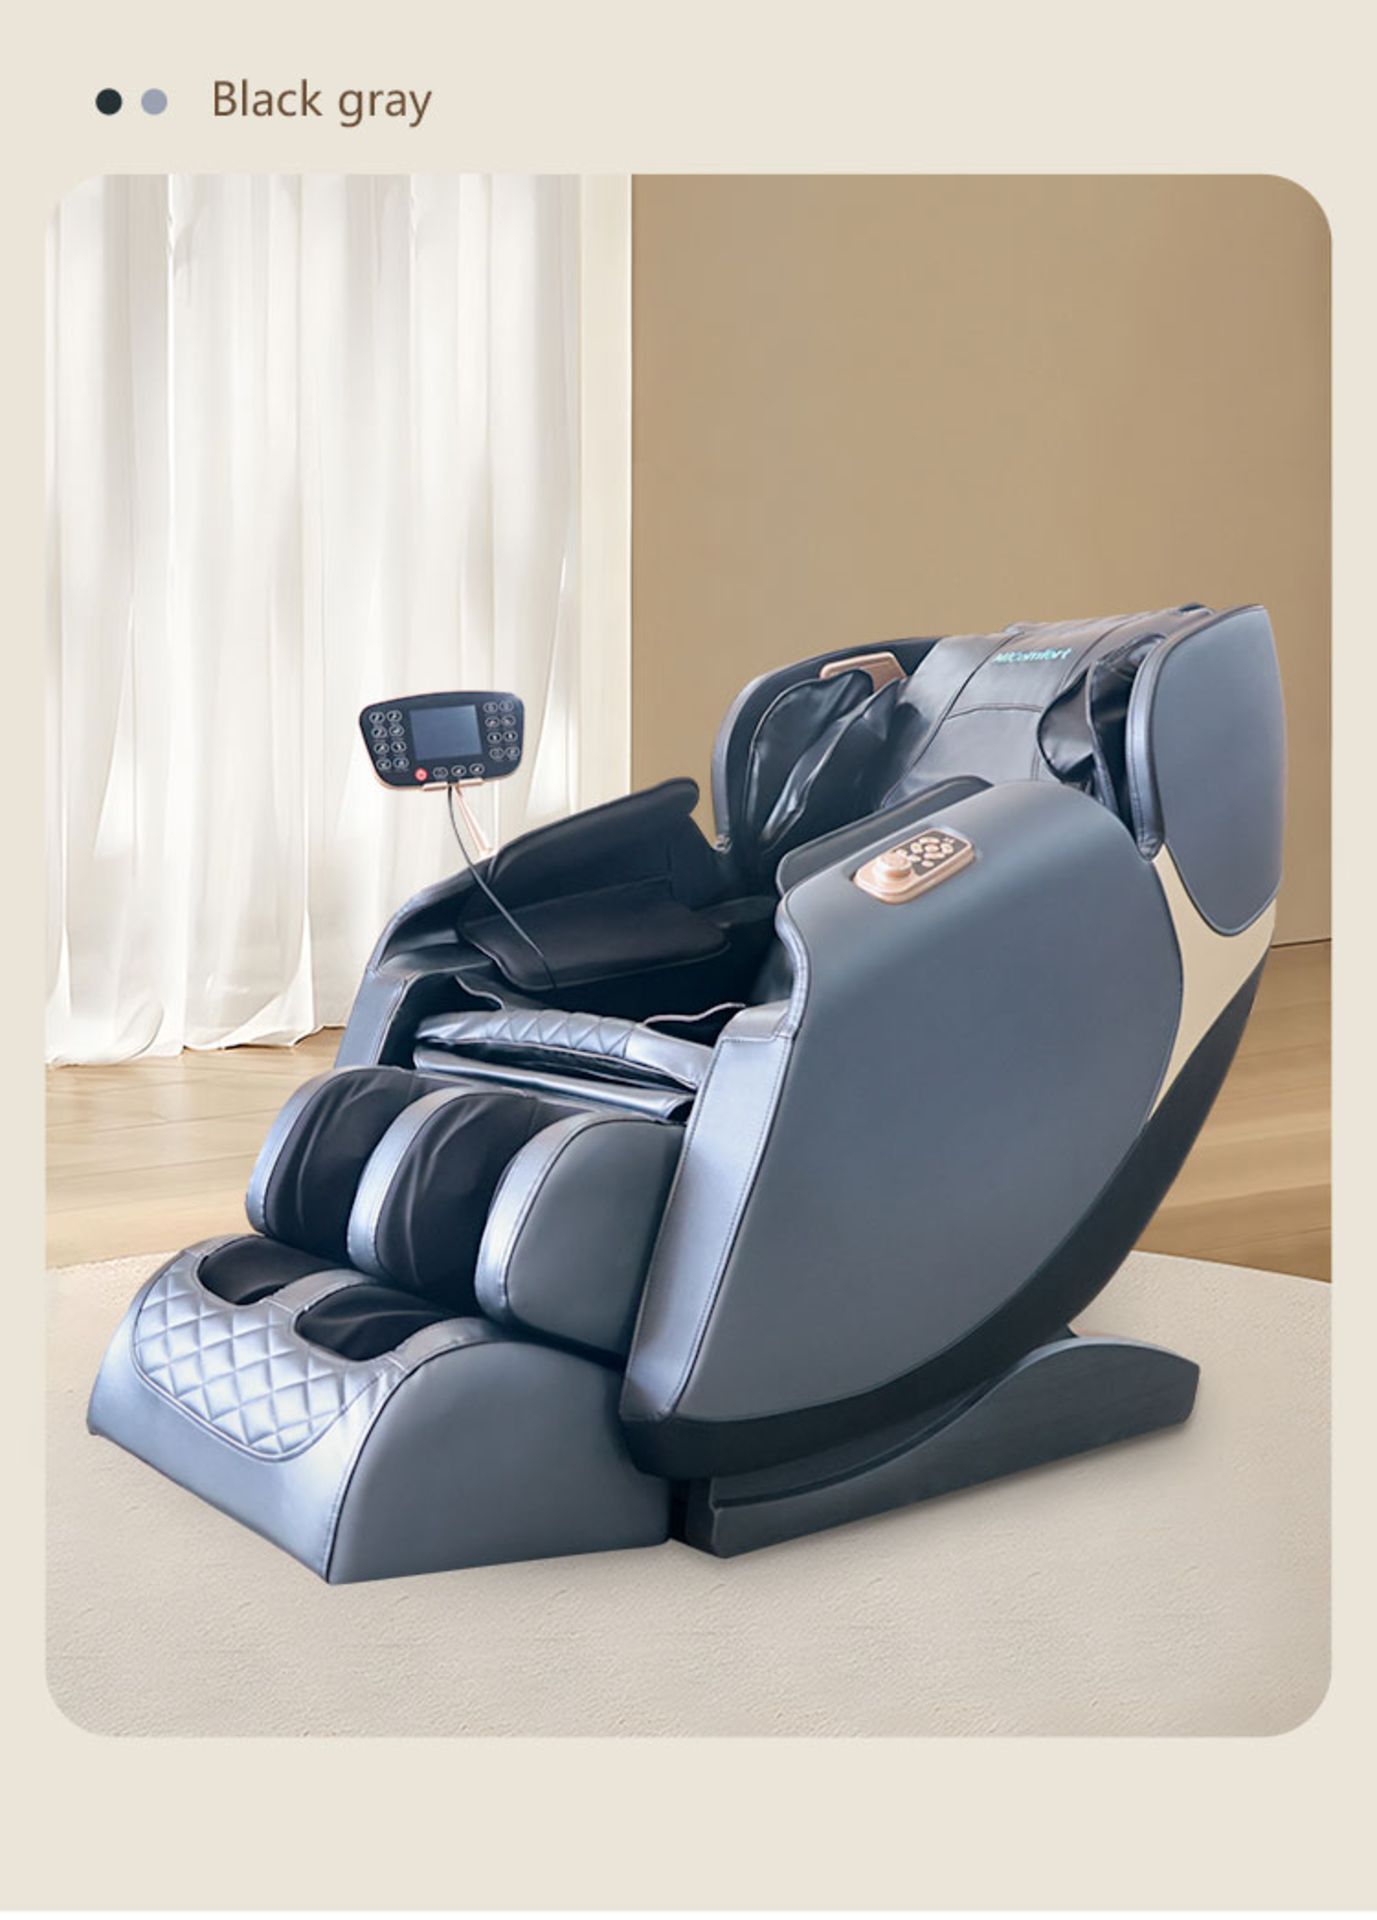 Brand New in Box Orchid Blue/Black MiComfort Full Body Massage Chair RRP £2199 *NO VAT* - Image 4 of 14